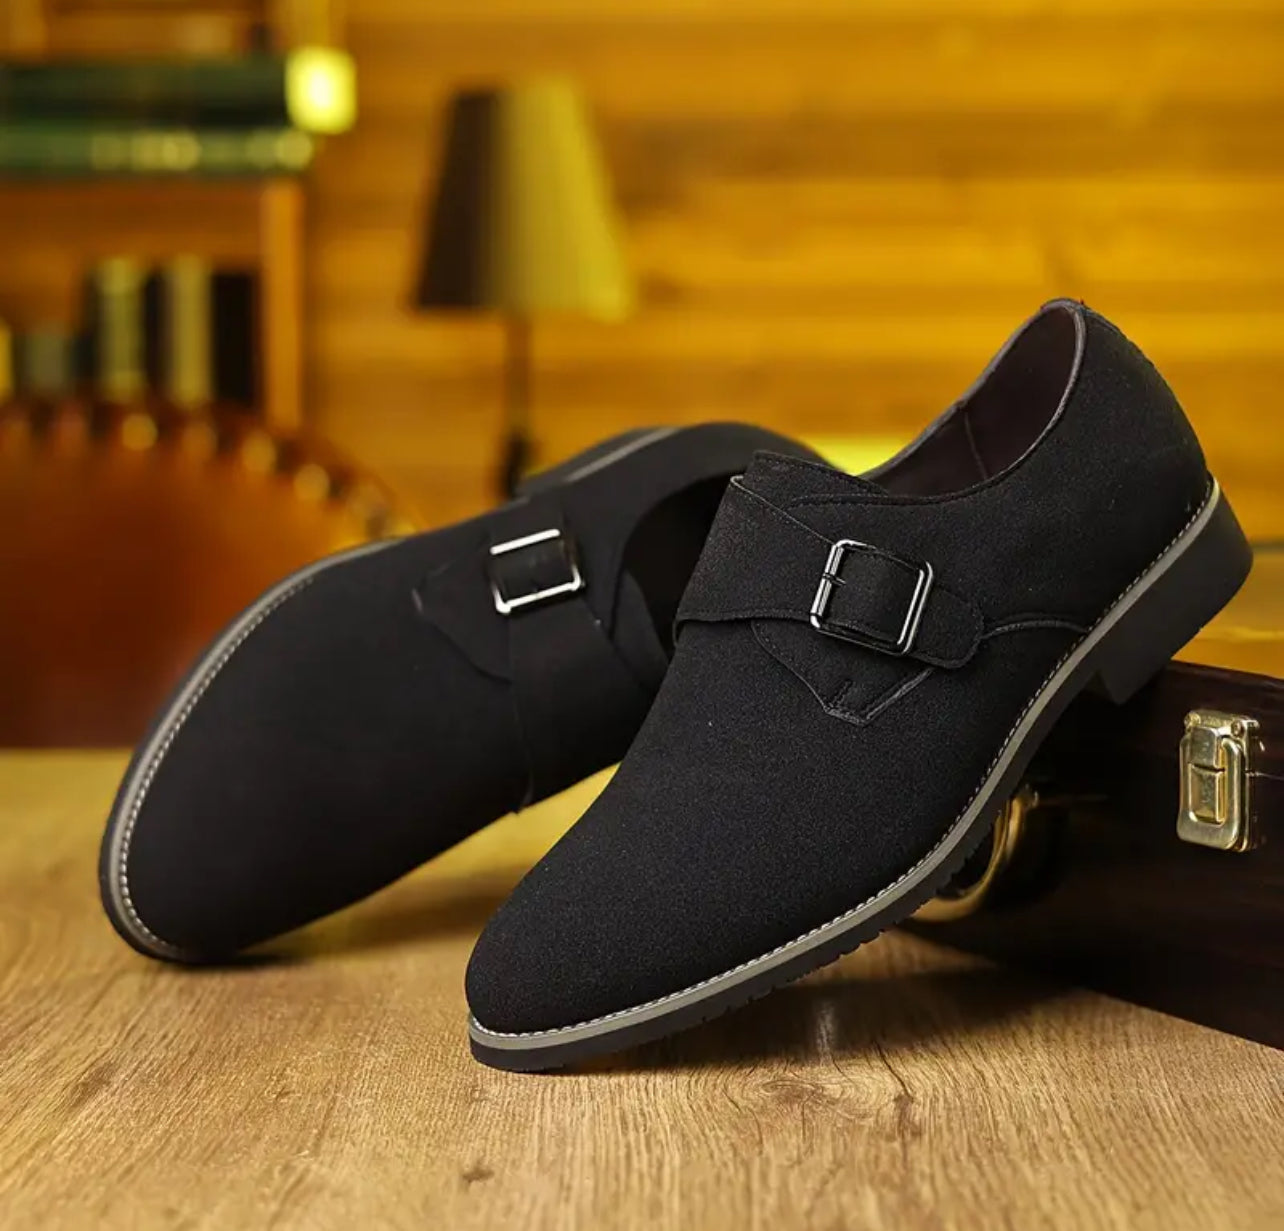 PLUS SIZE Men's Solid Monk Strap Loafers With PU Leather Uppers